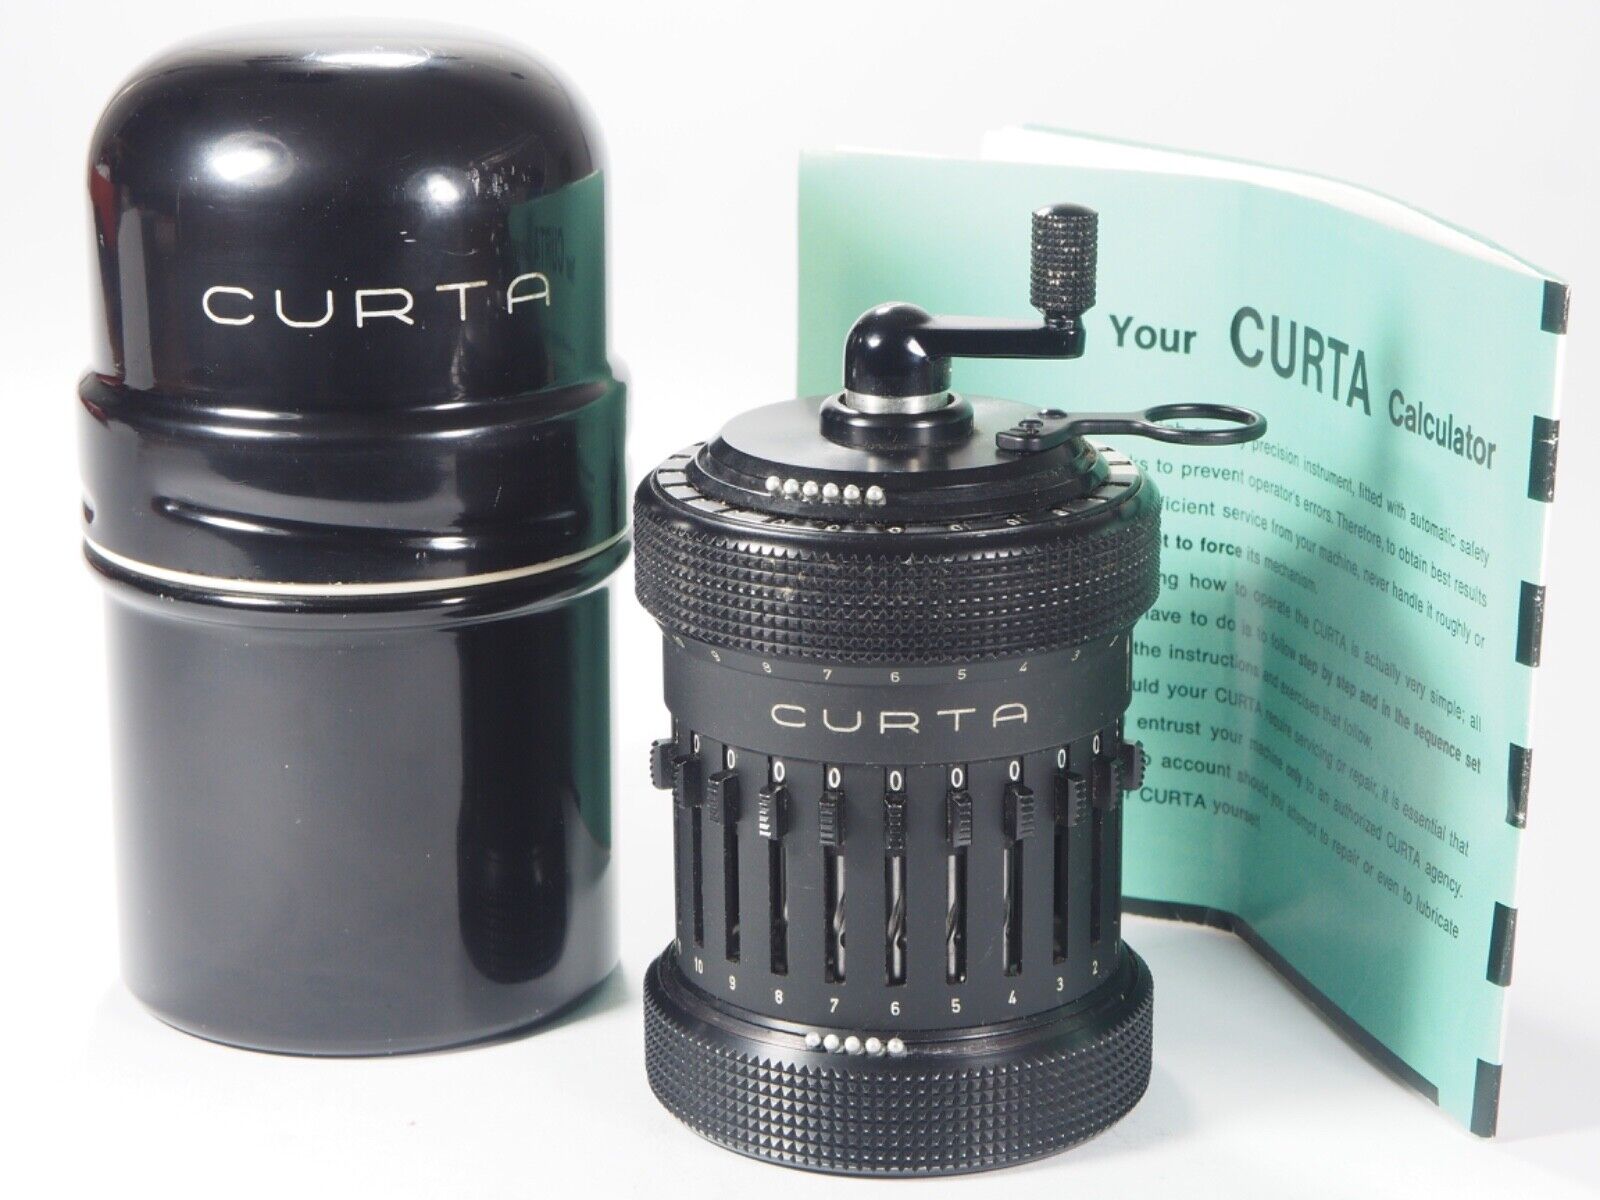 Curta Calculator 1955 all black Type 2 all metal, w/can 3 manuals fully serviced